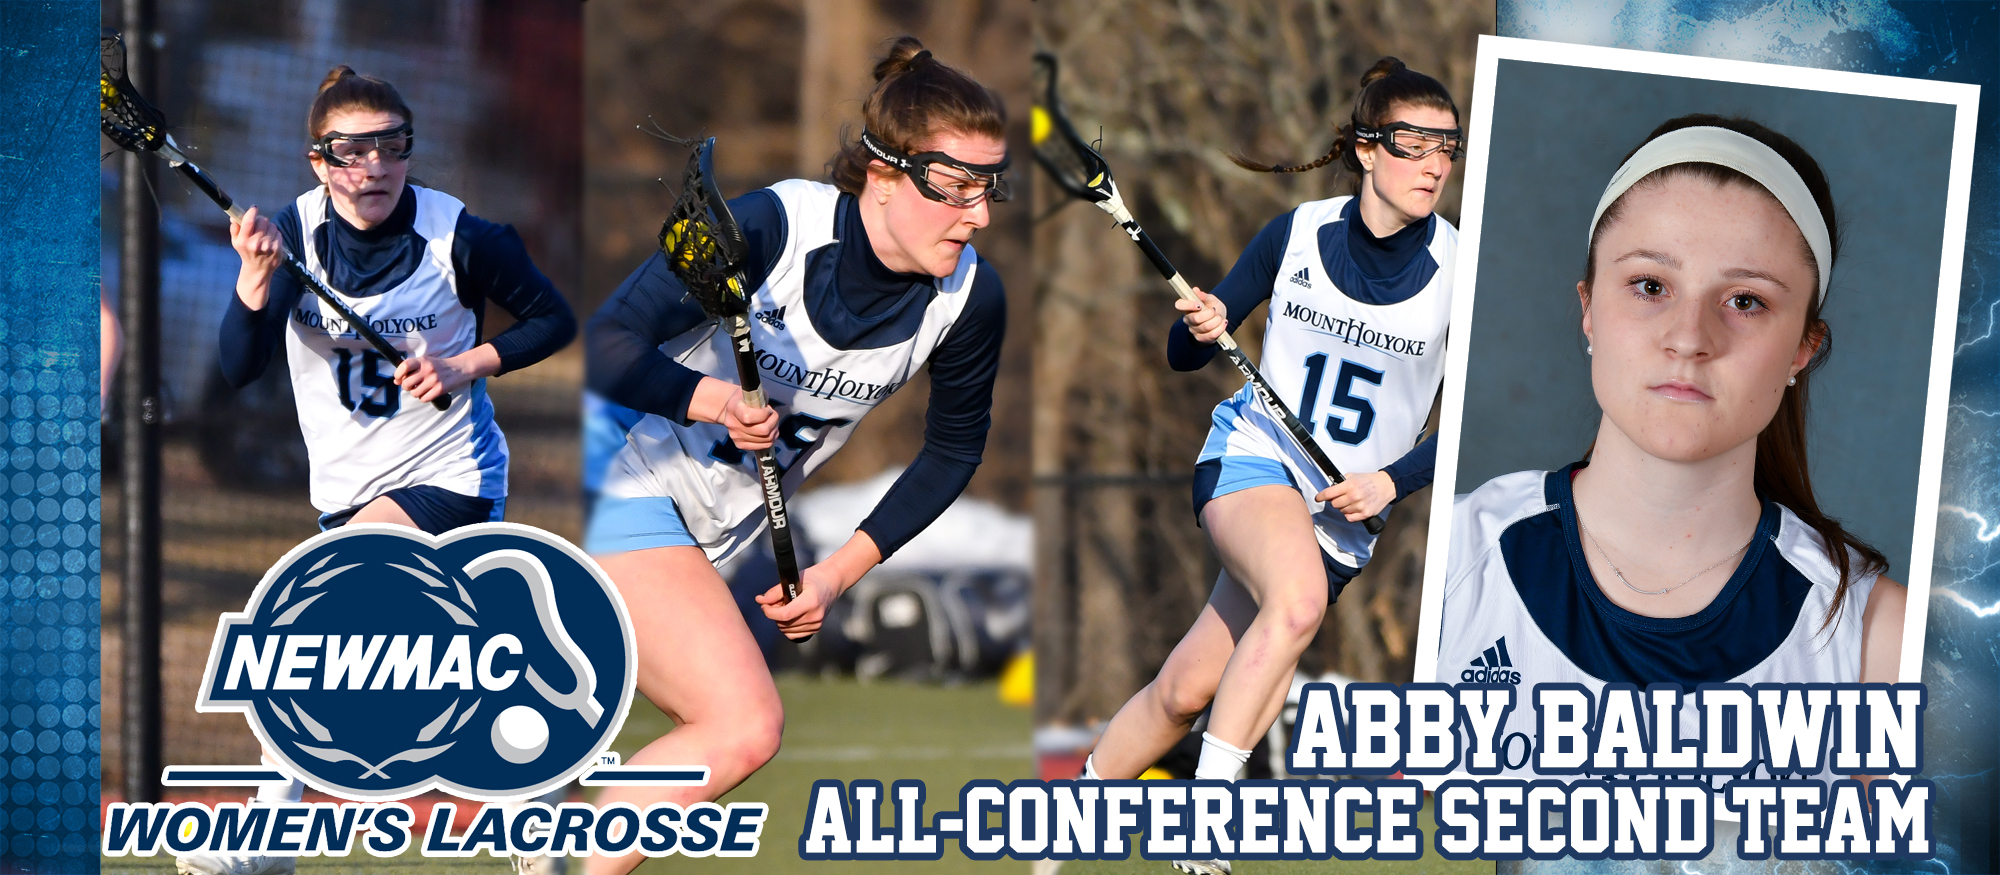 Photo featuring a variety of images of first year Abby Baldwin, who was named to the NEWMAC Lacrosse All-Conference Second Team on May 9, 2019.